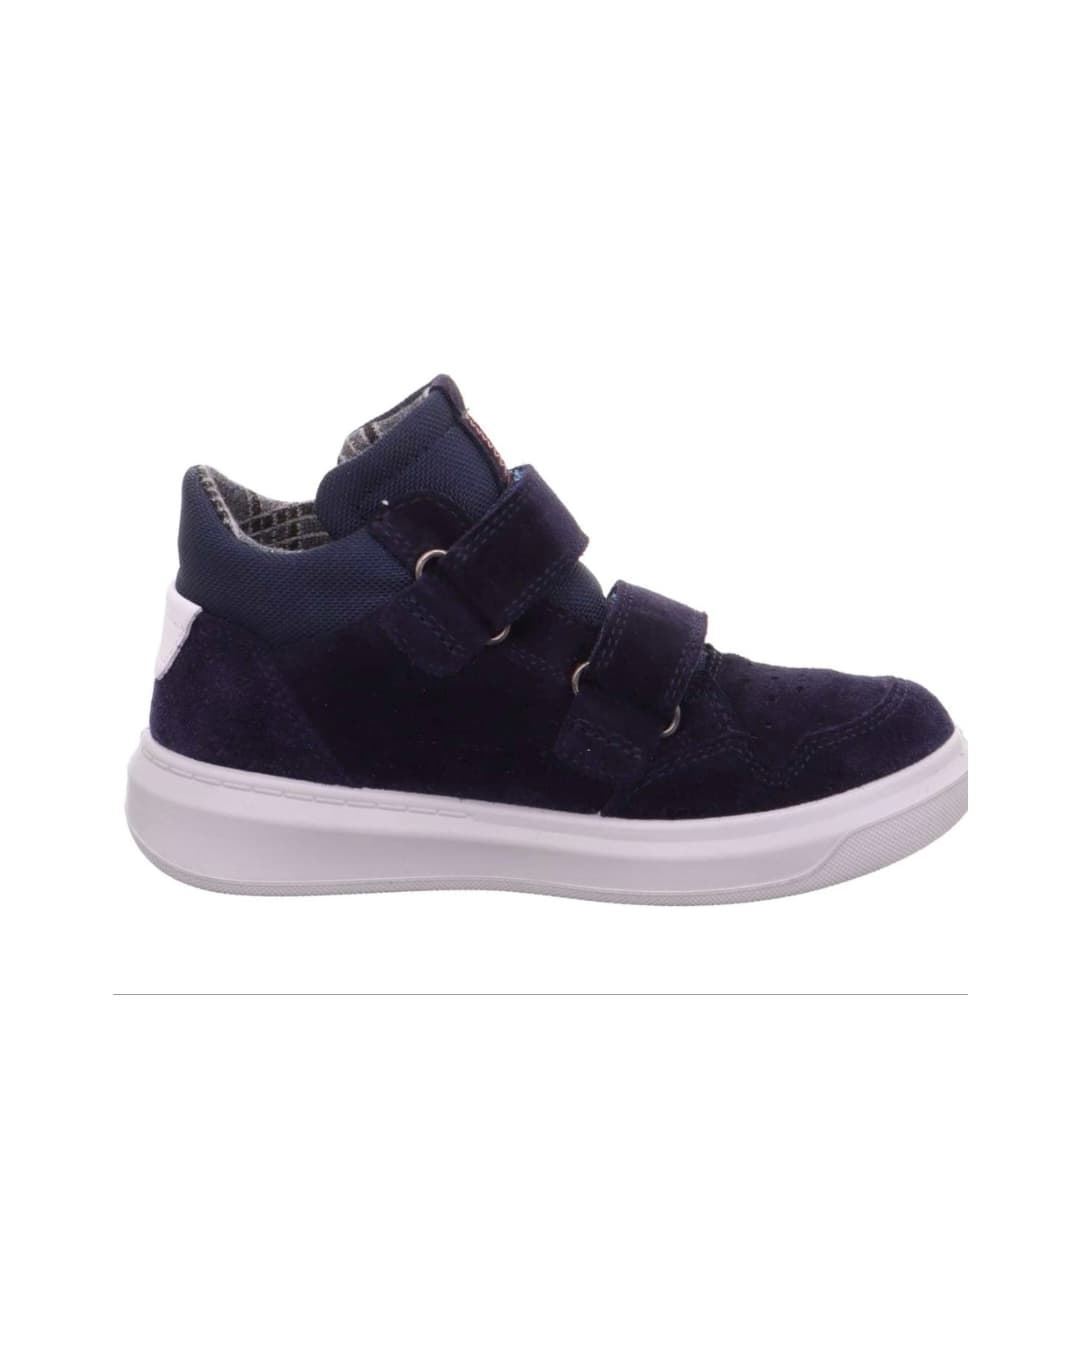 Superfit Gore-tex Boots for Kids Navy Blue - Image 2